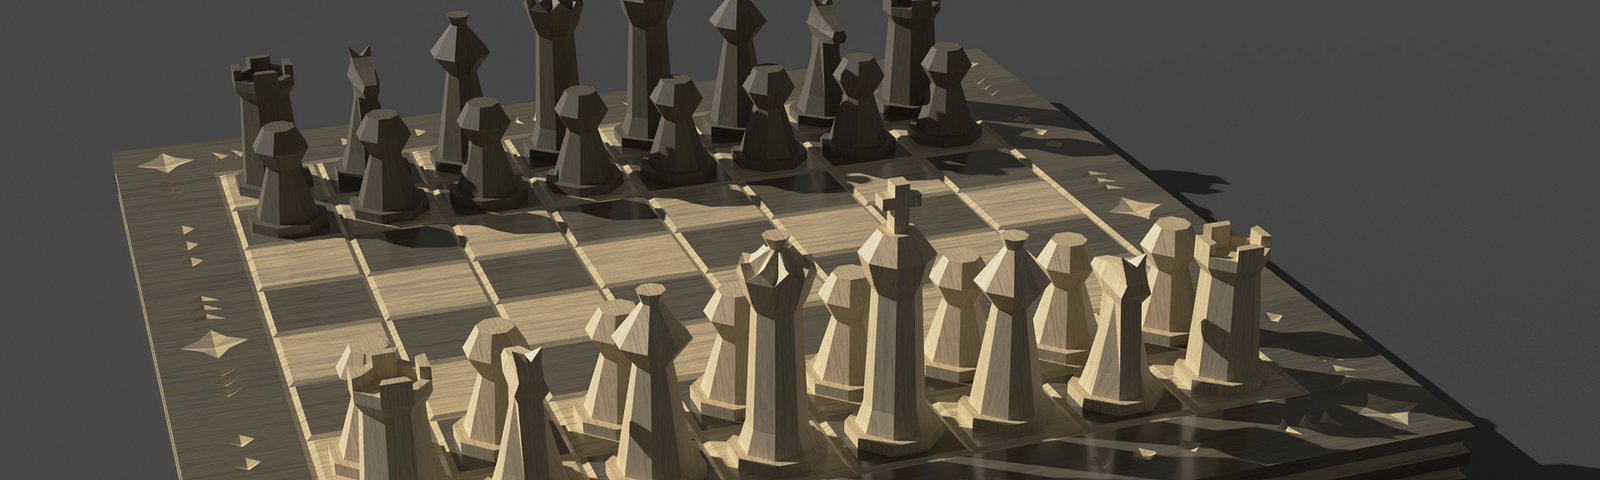 Making Chess in Python. This is a large project that me and a…, by  PasiduPerera